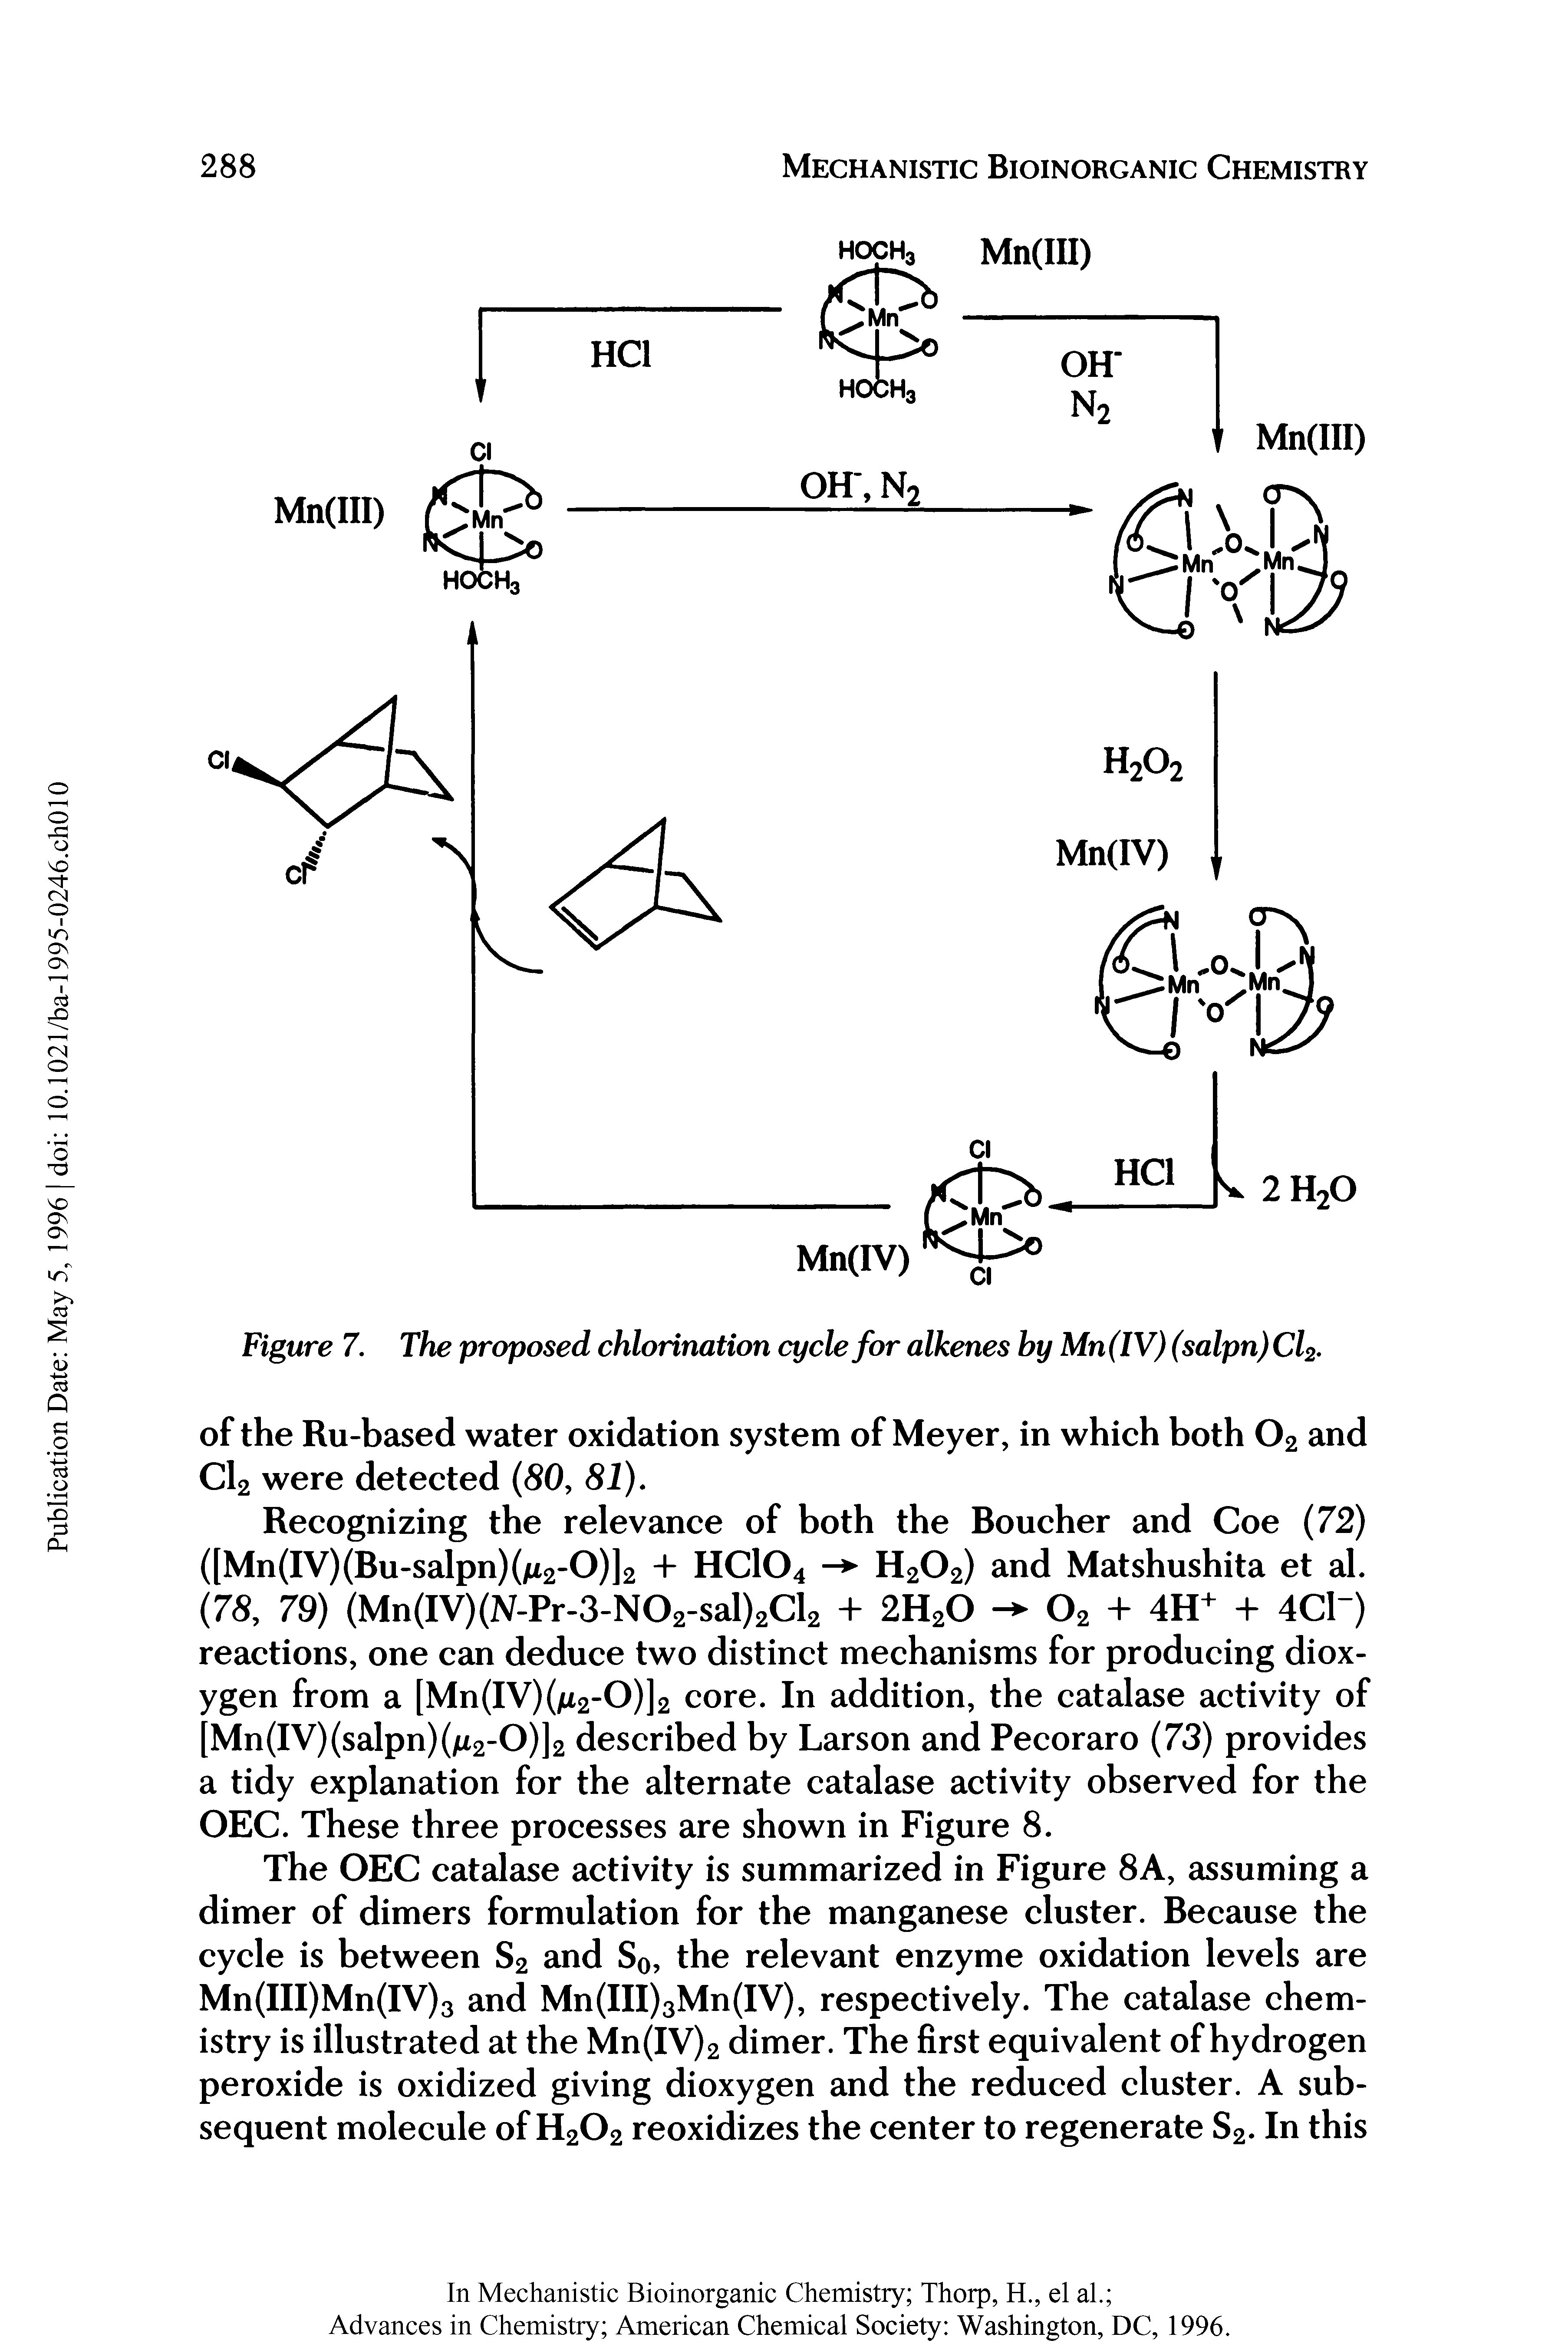 Figure 7. The proposed chlorination cycle for alkenes hy Mn (IV) (salpn) Cl2.